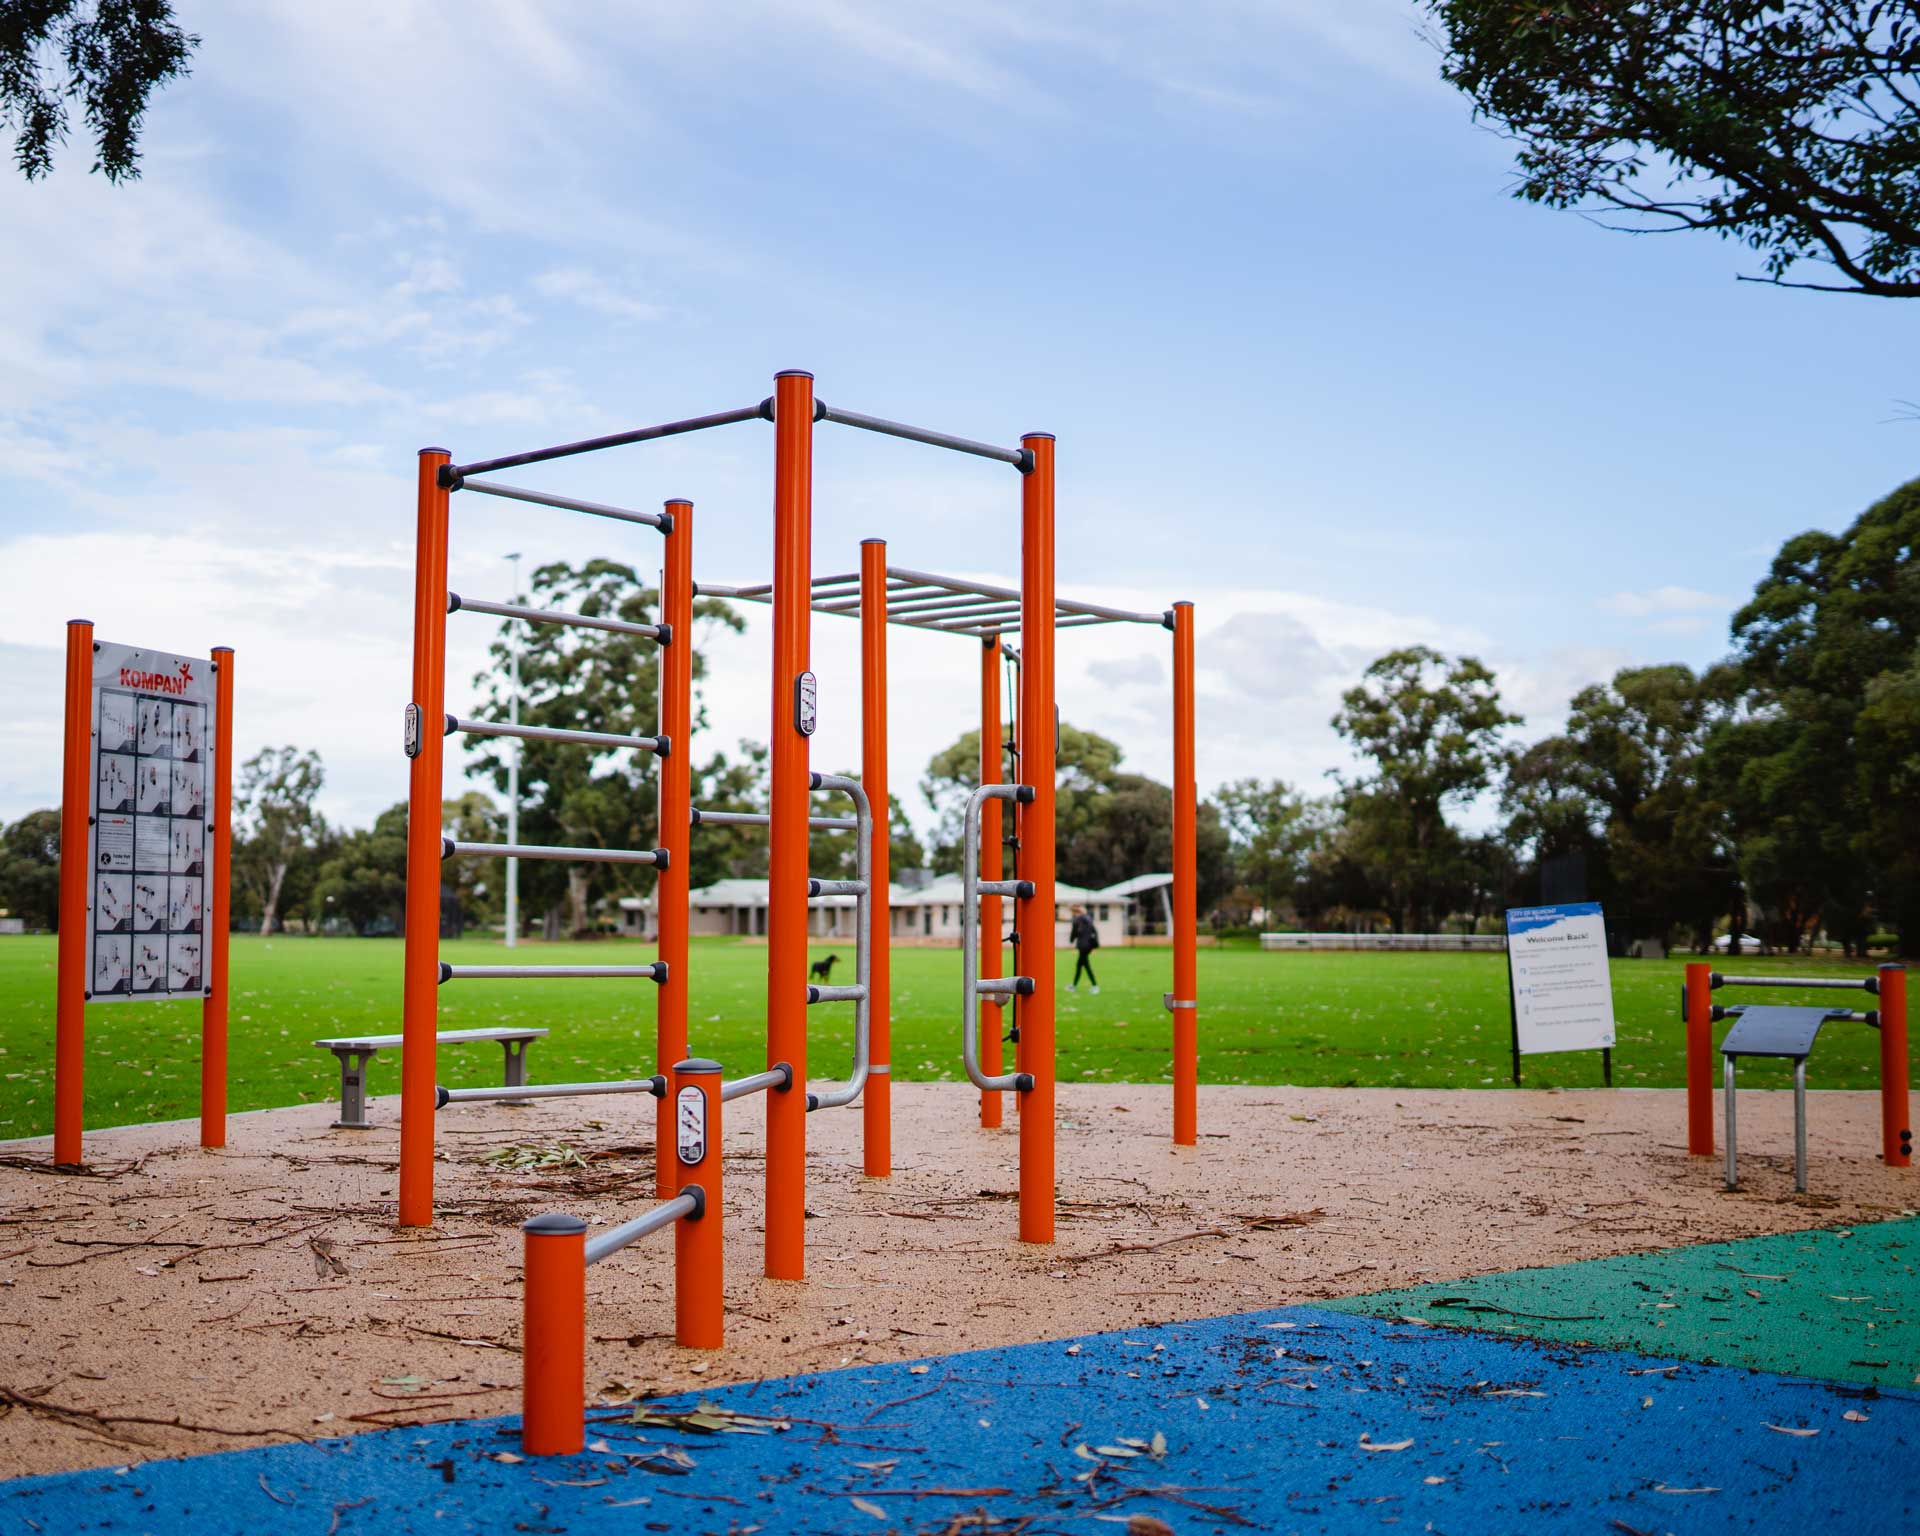 Exercise equipment at Forster Park.